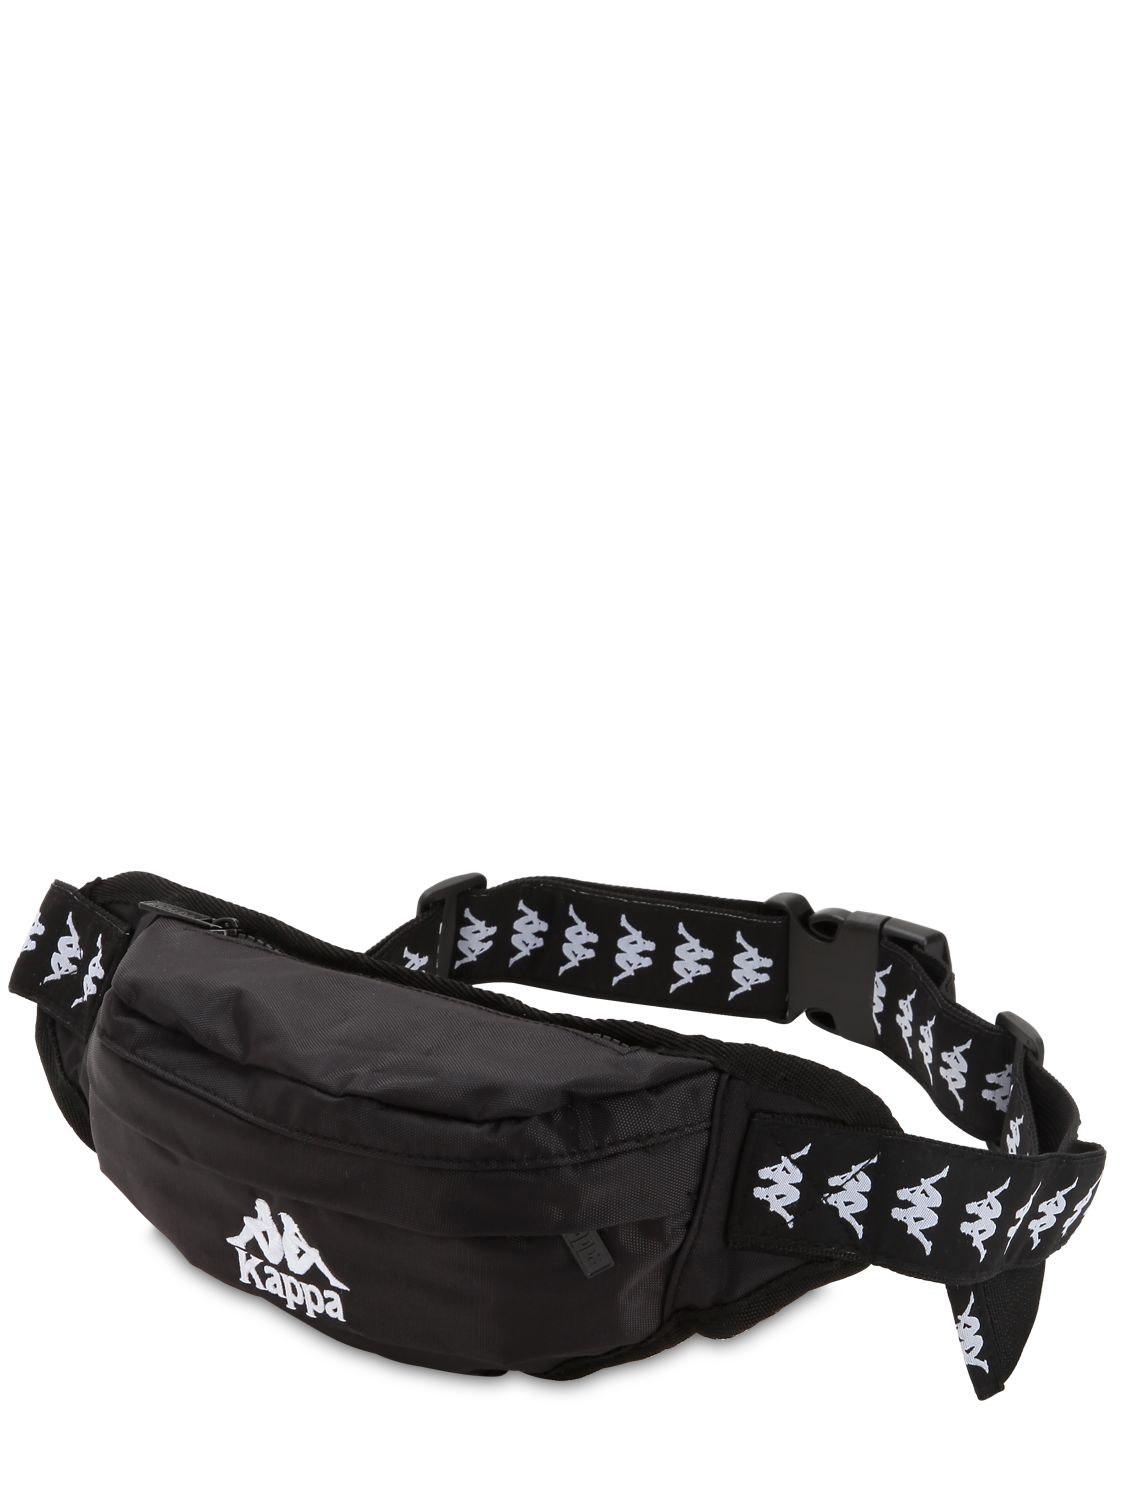 Fanny Pack Kappa Online Sale, UP TO 65% OFF